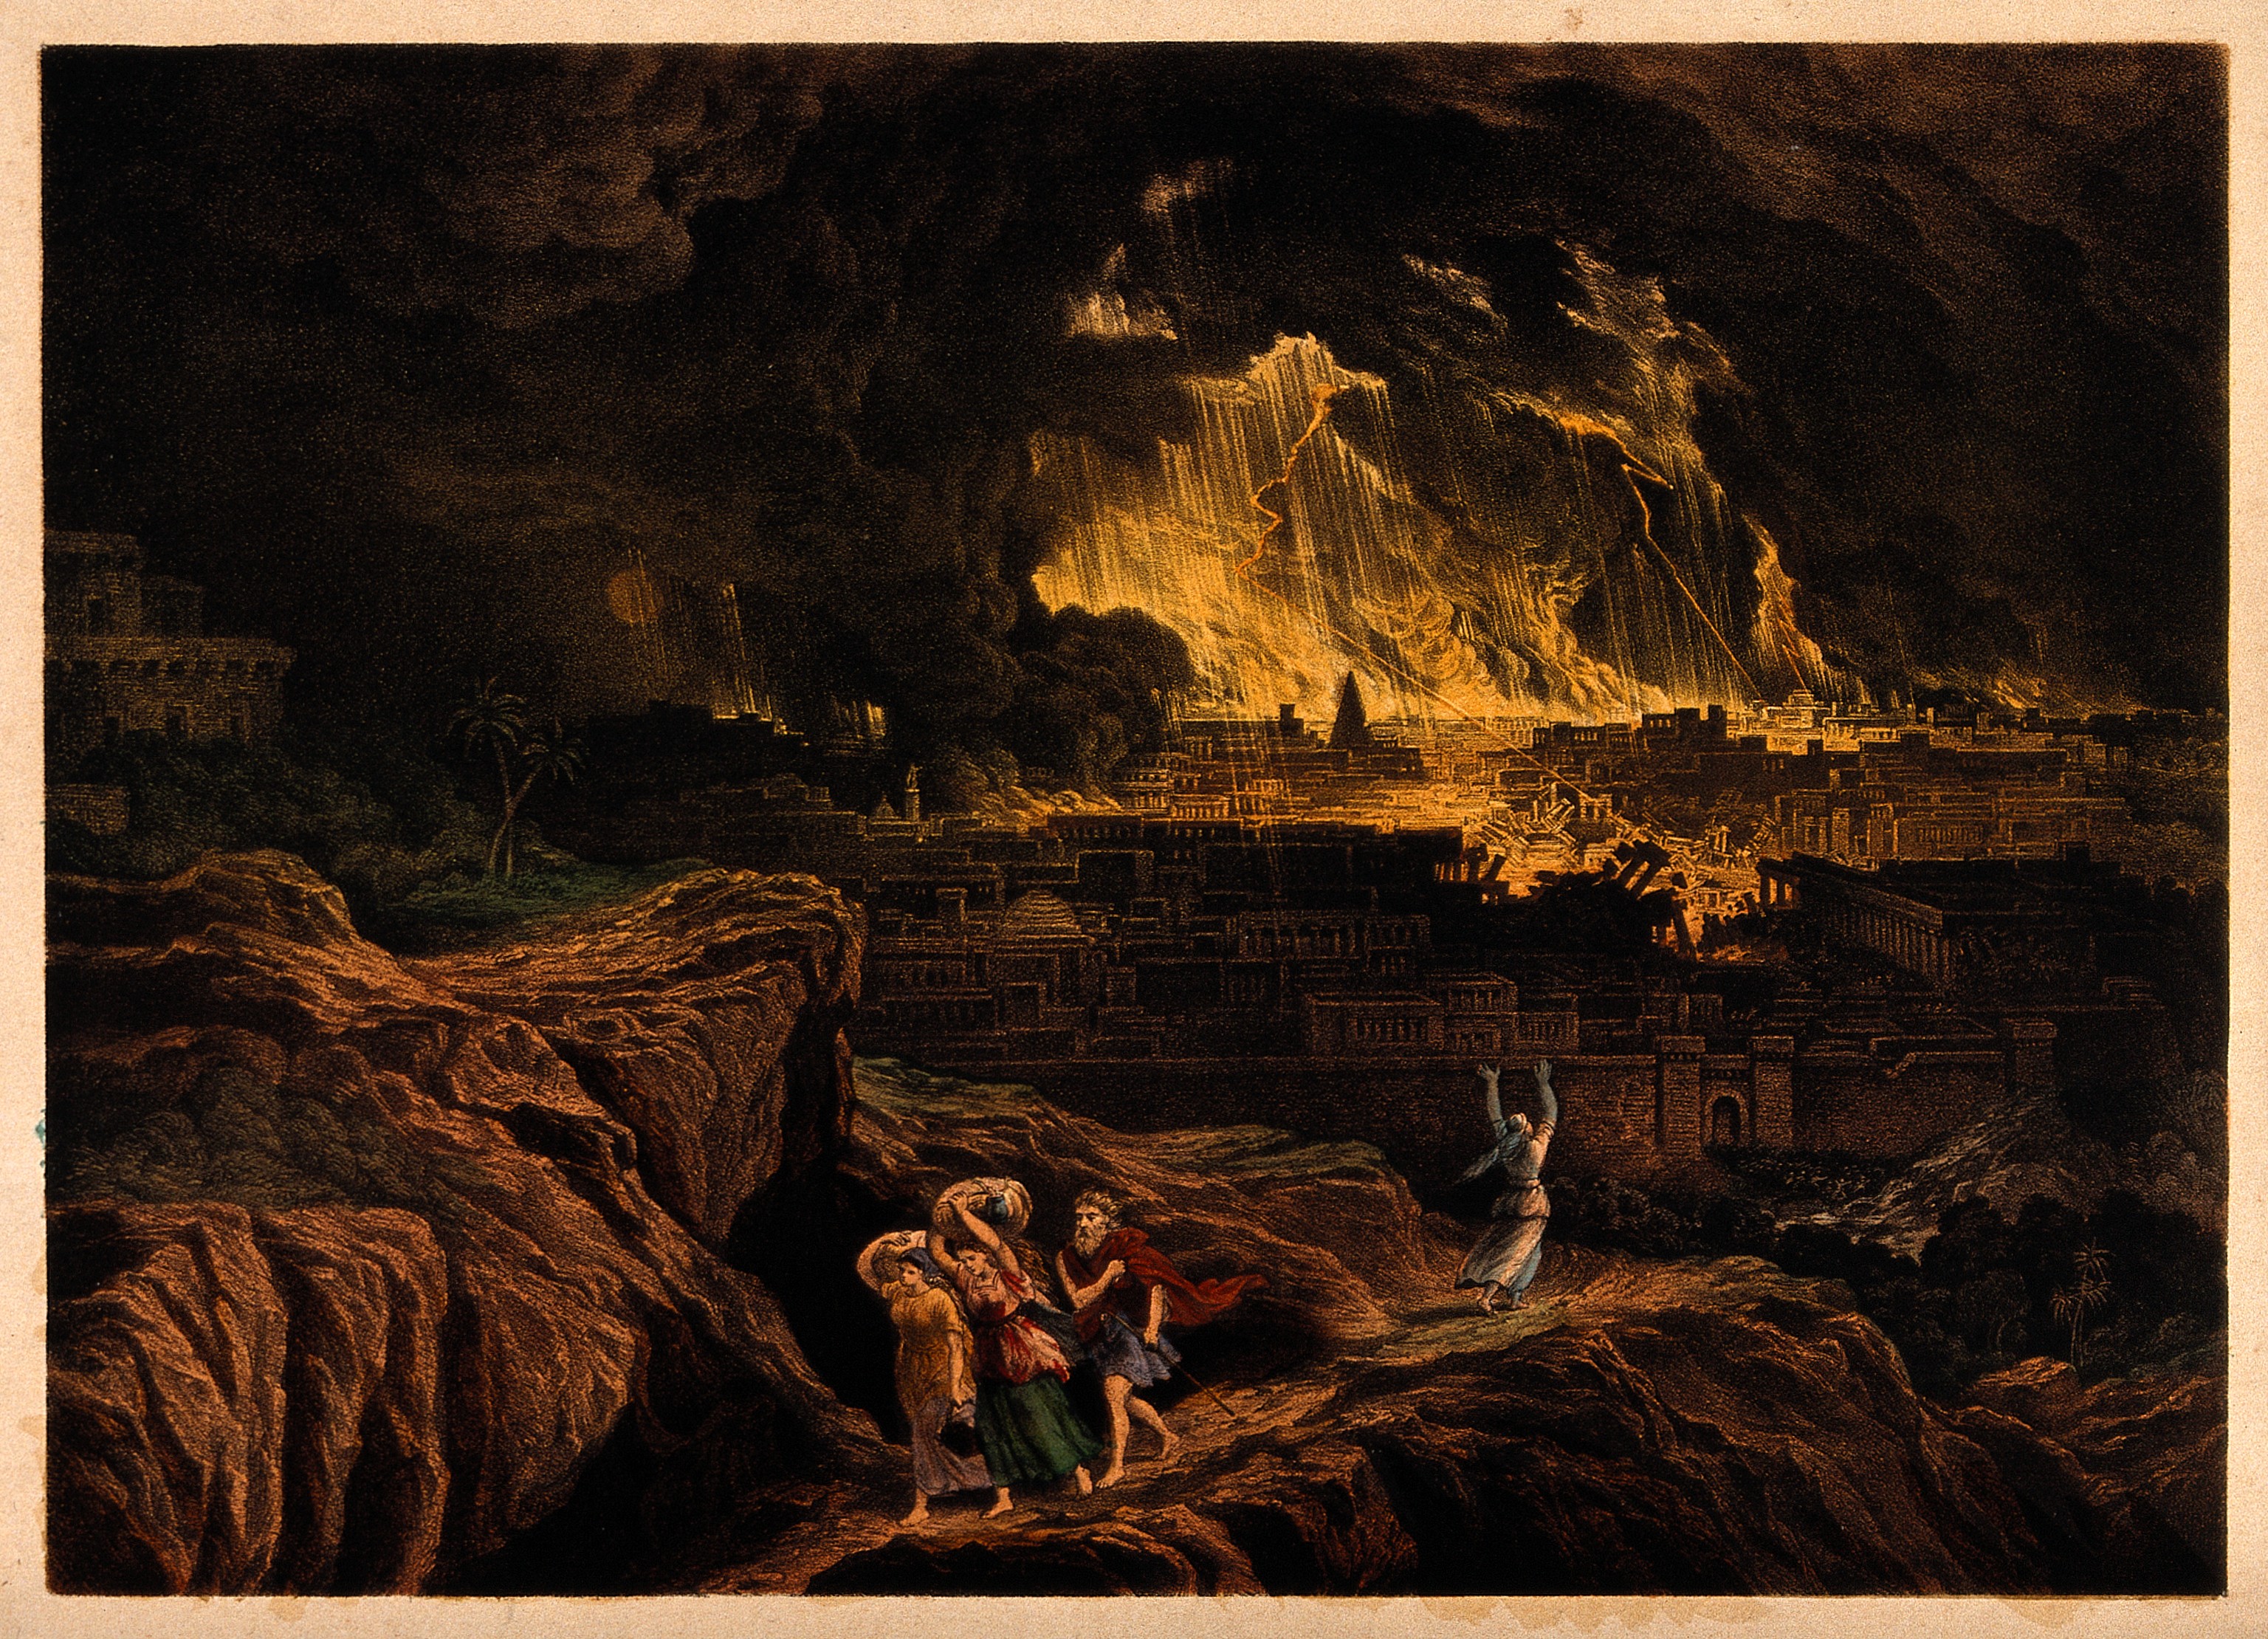 Lot and his family flee Sodom as it burns; Lot's wife faces Wellcome V0034238